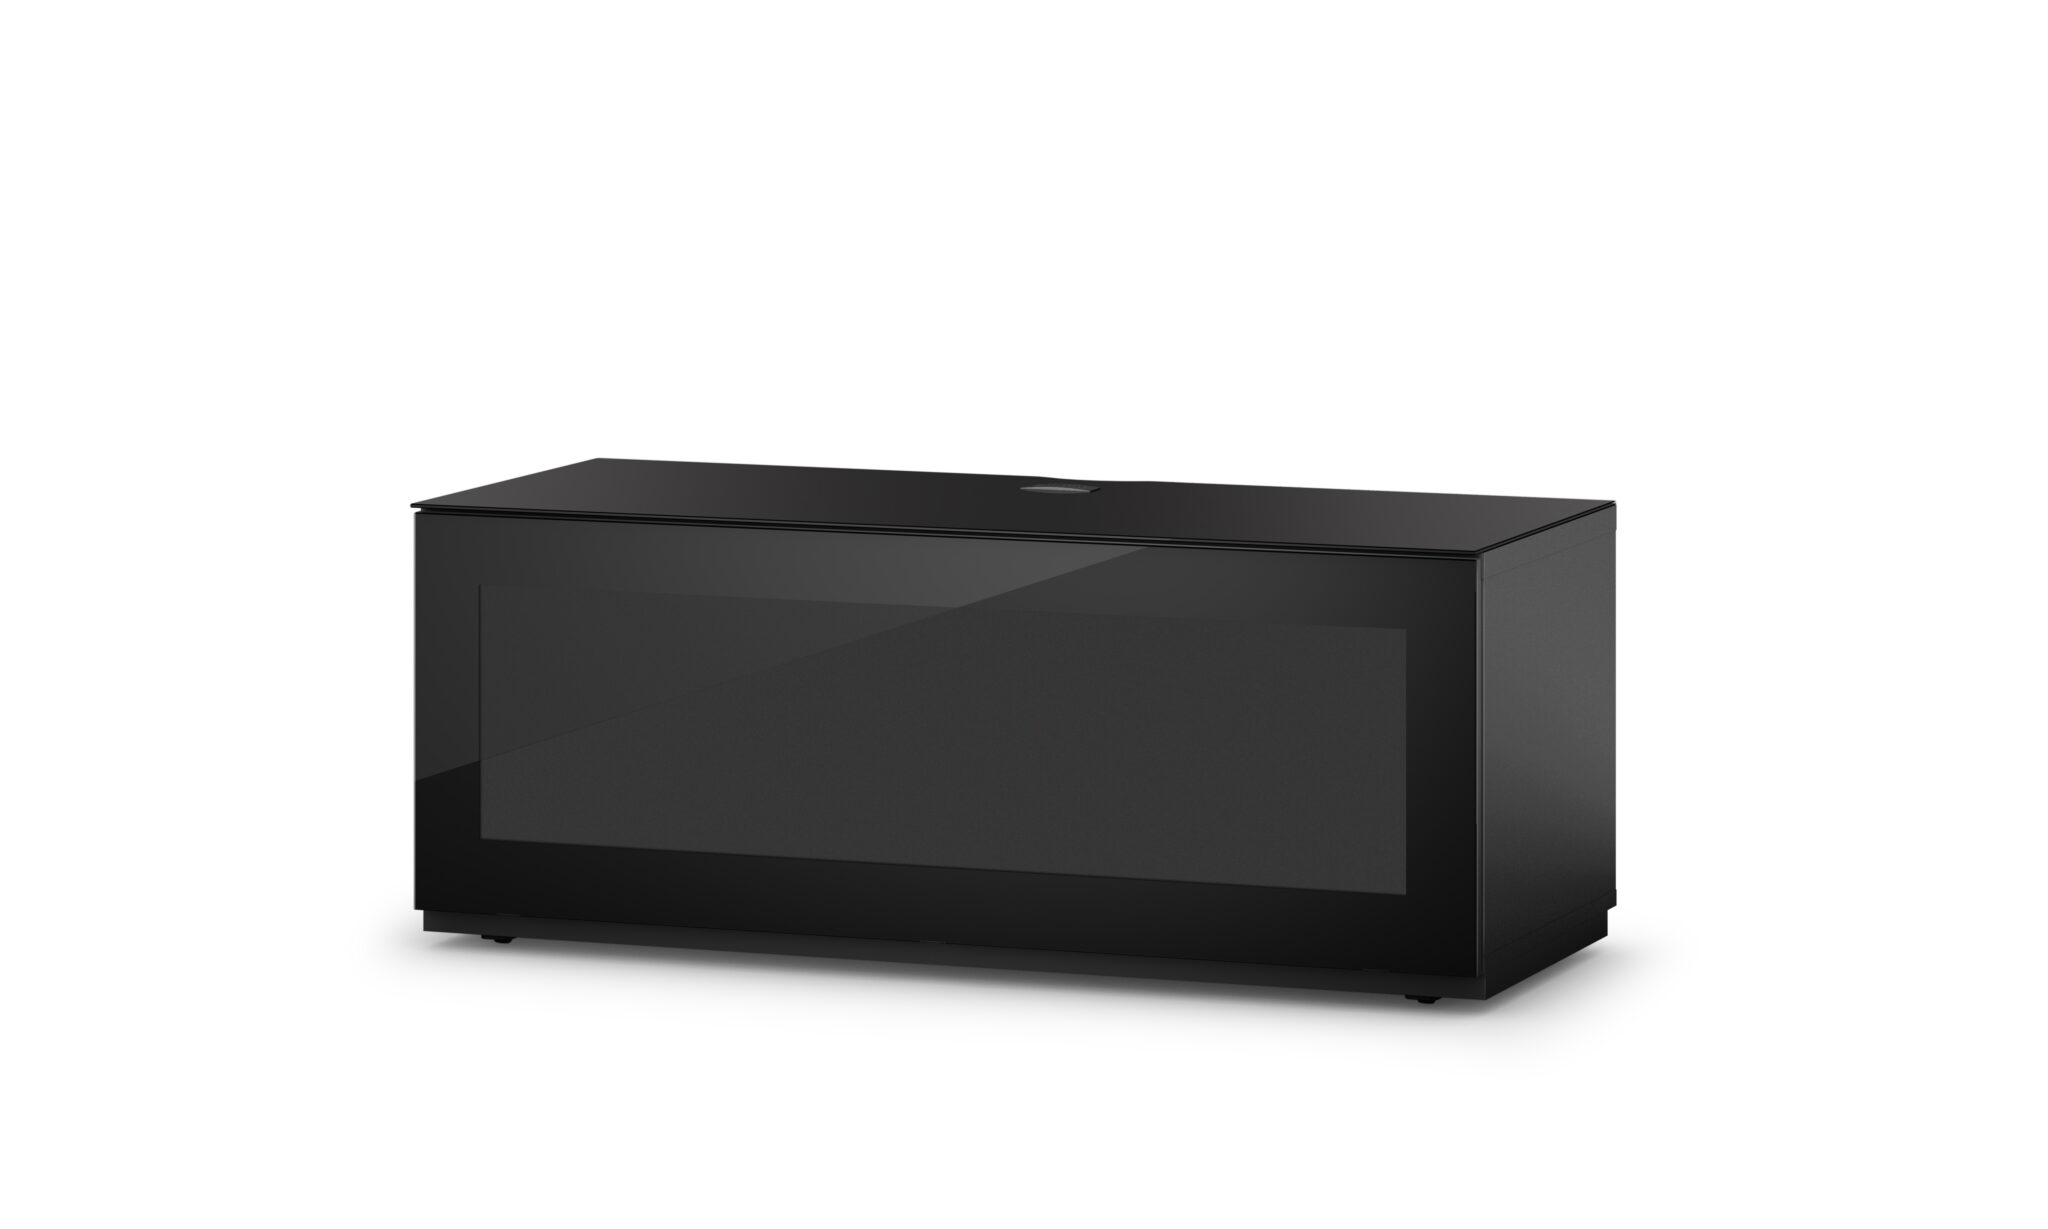 Sonorous MD 9140 B HBLK BLK